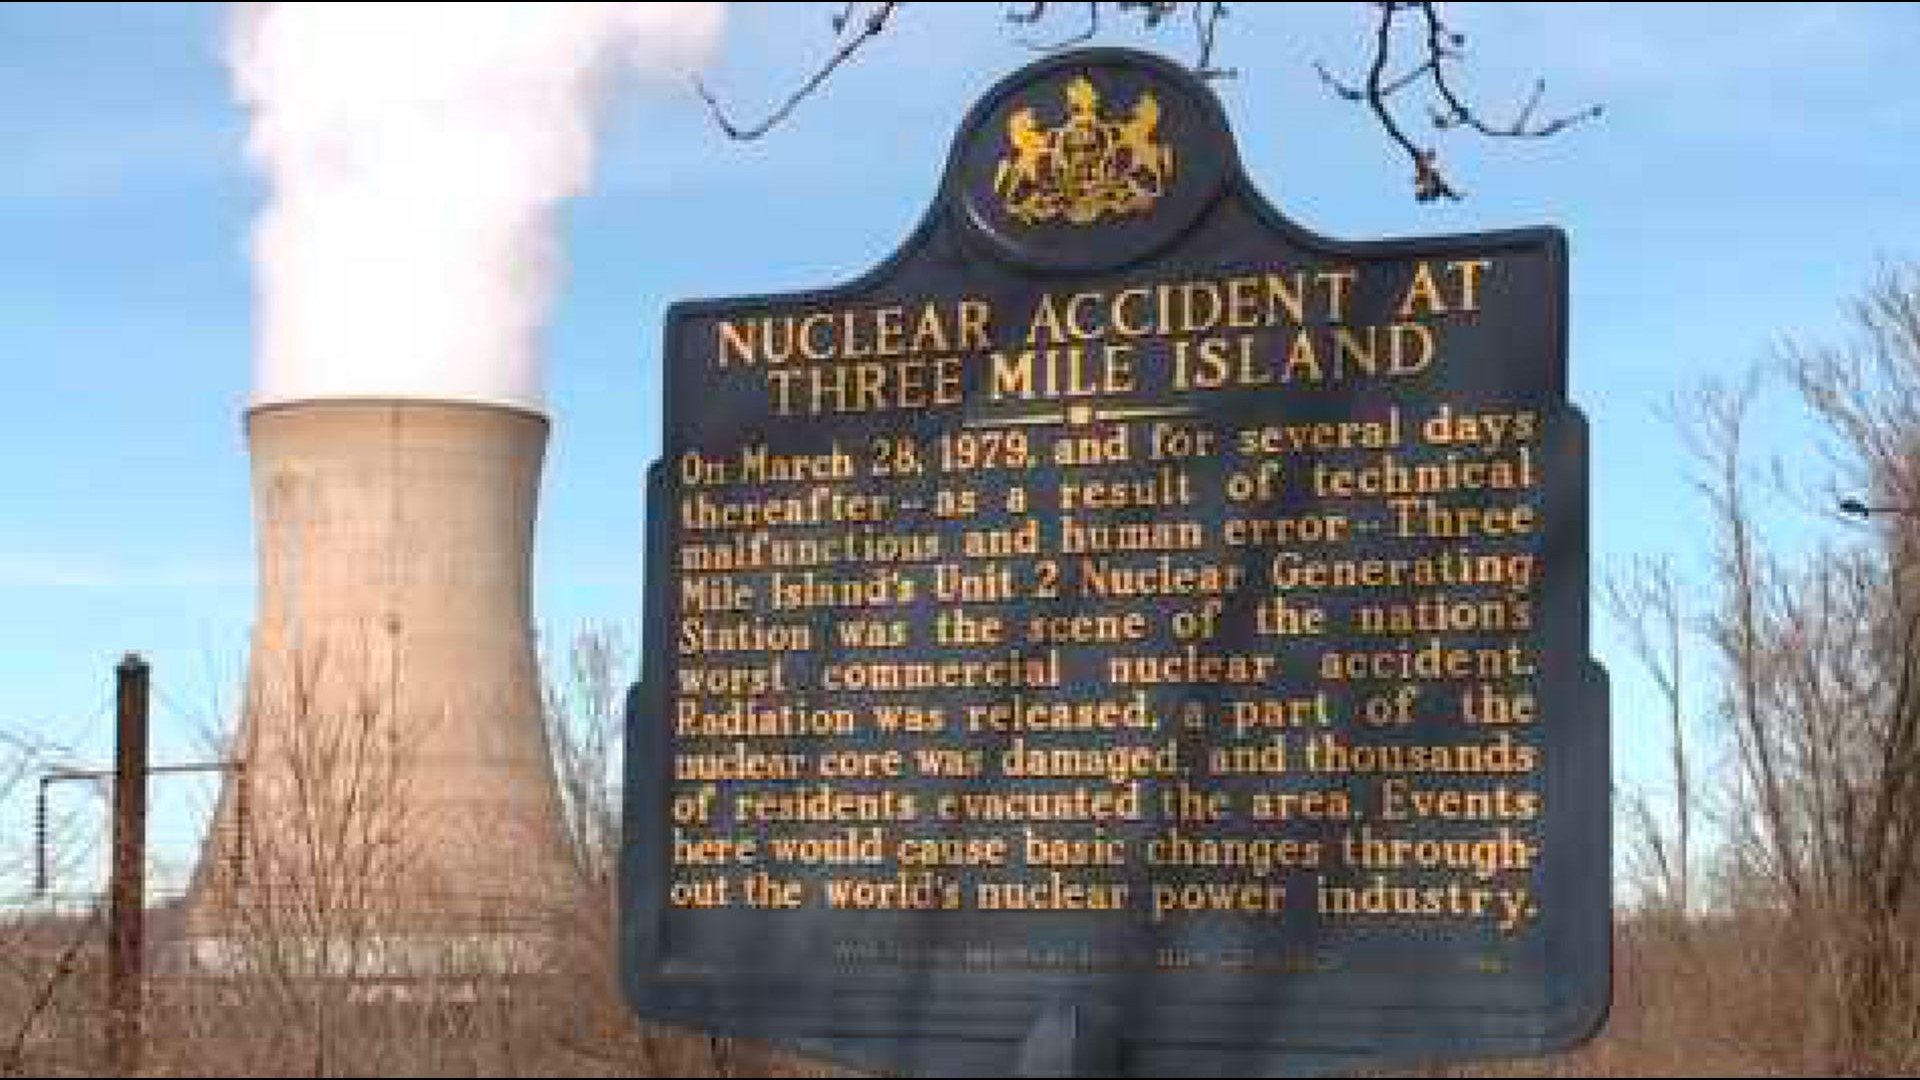 44 years ago today A neardisaster at Three Mile Island